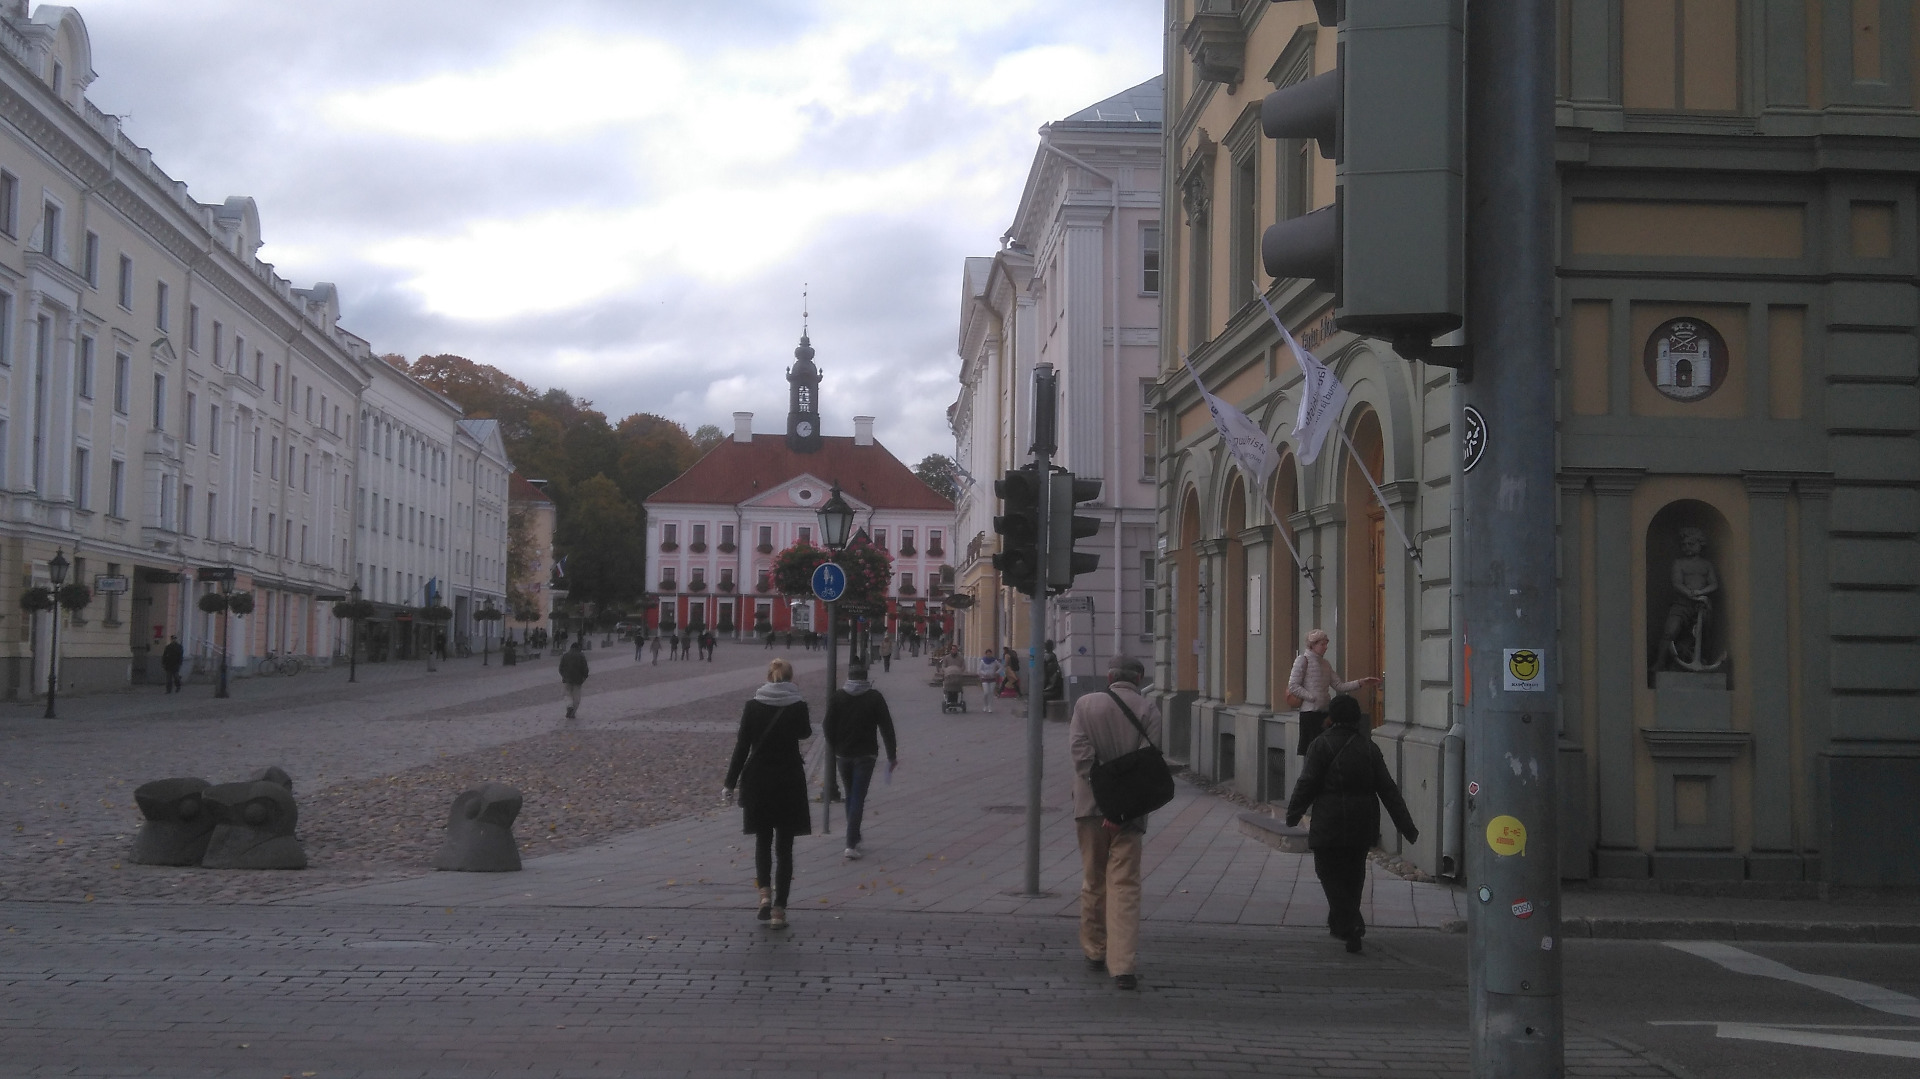 Tartu, views of the Place of the House. rephoto